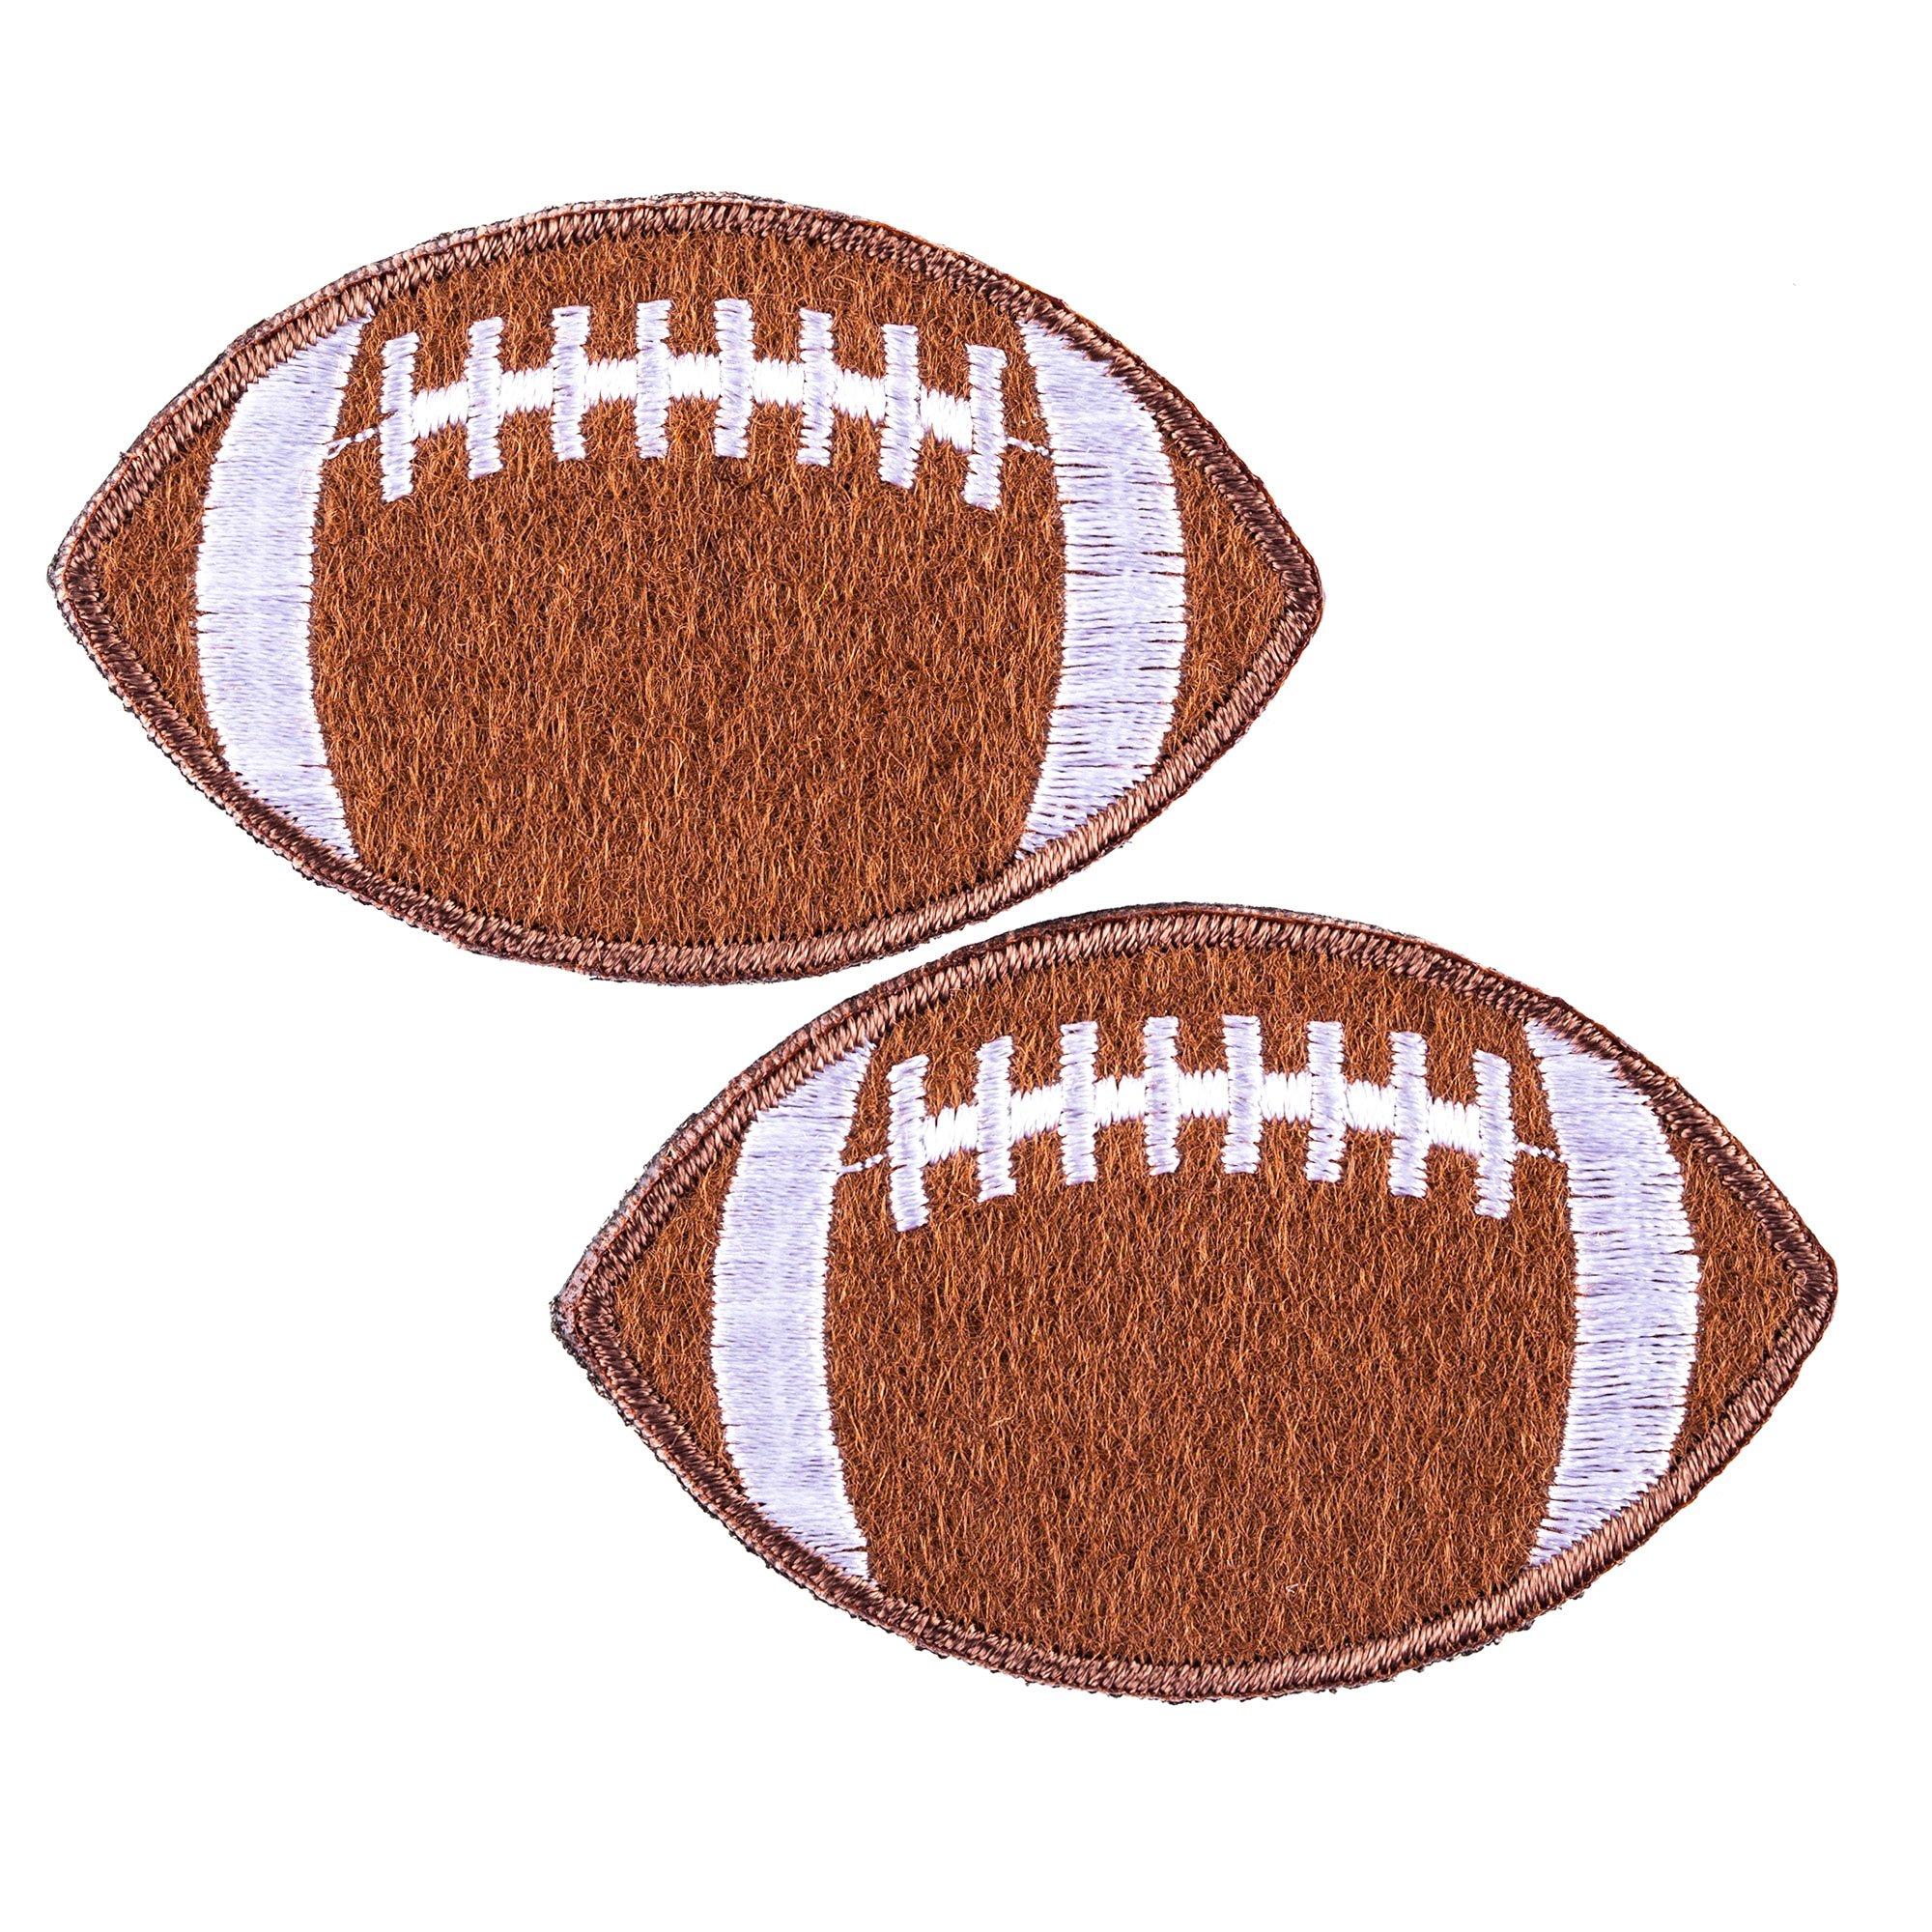 Football Embroidered Patch Gridiron Pigskin Ball Iron-On Applique Sports  Emblem